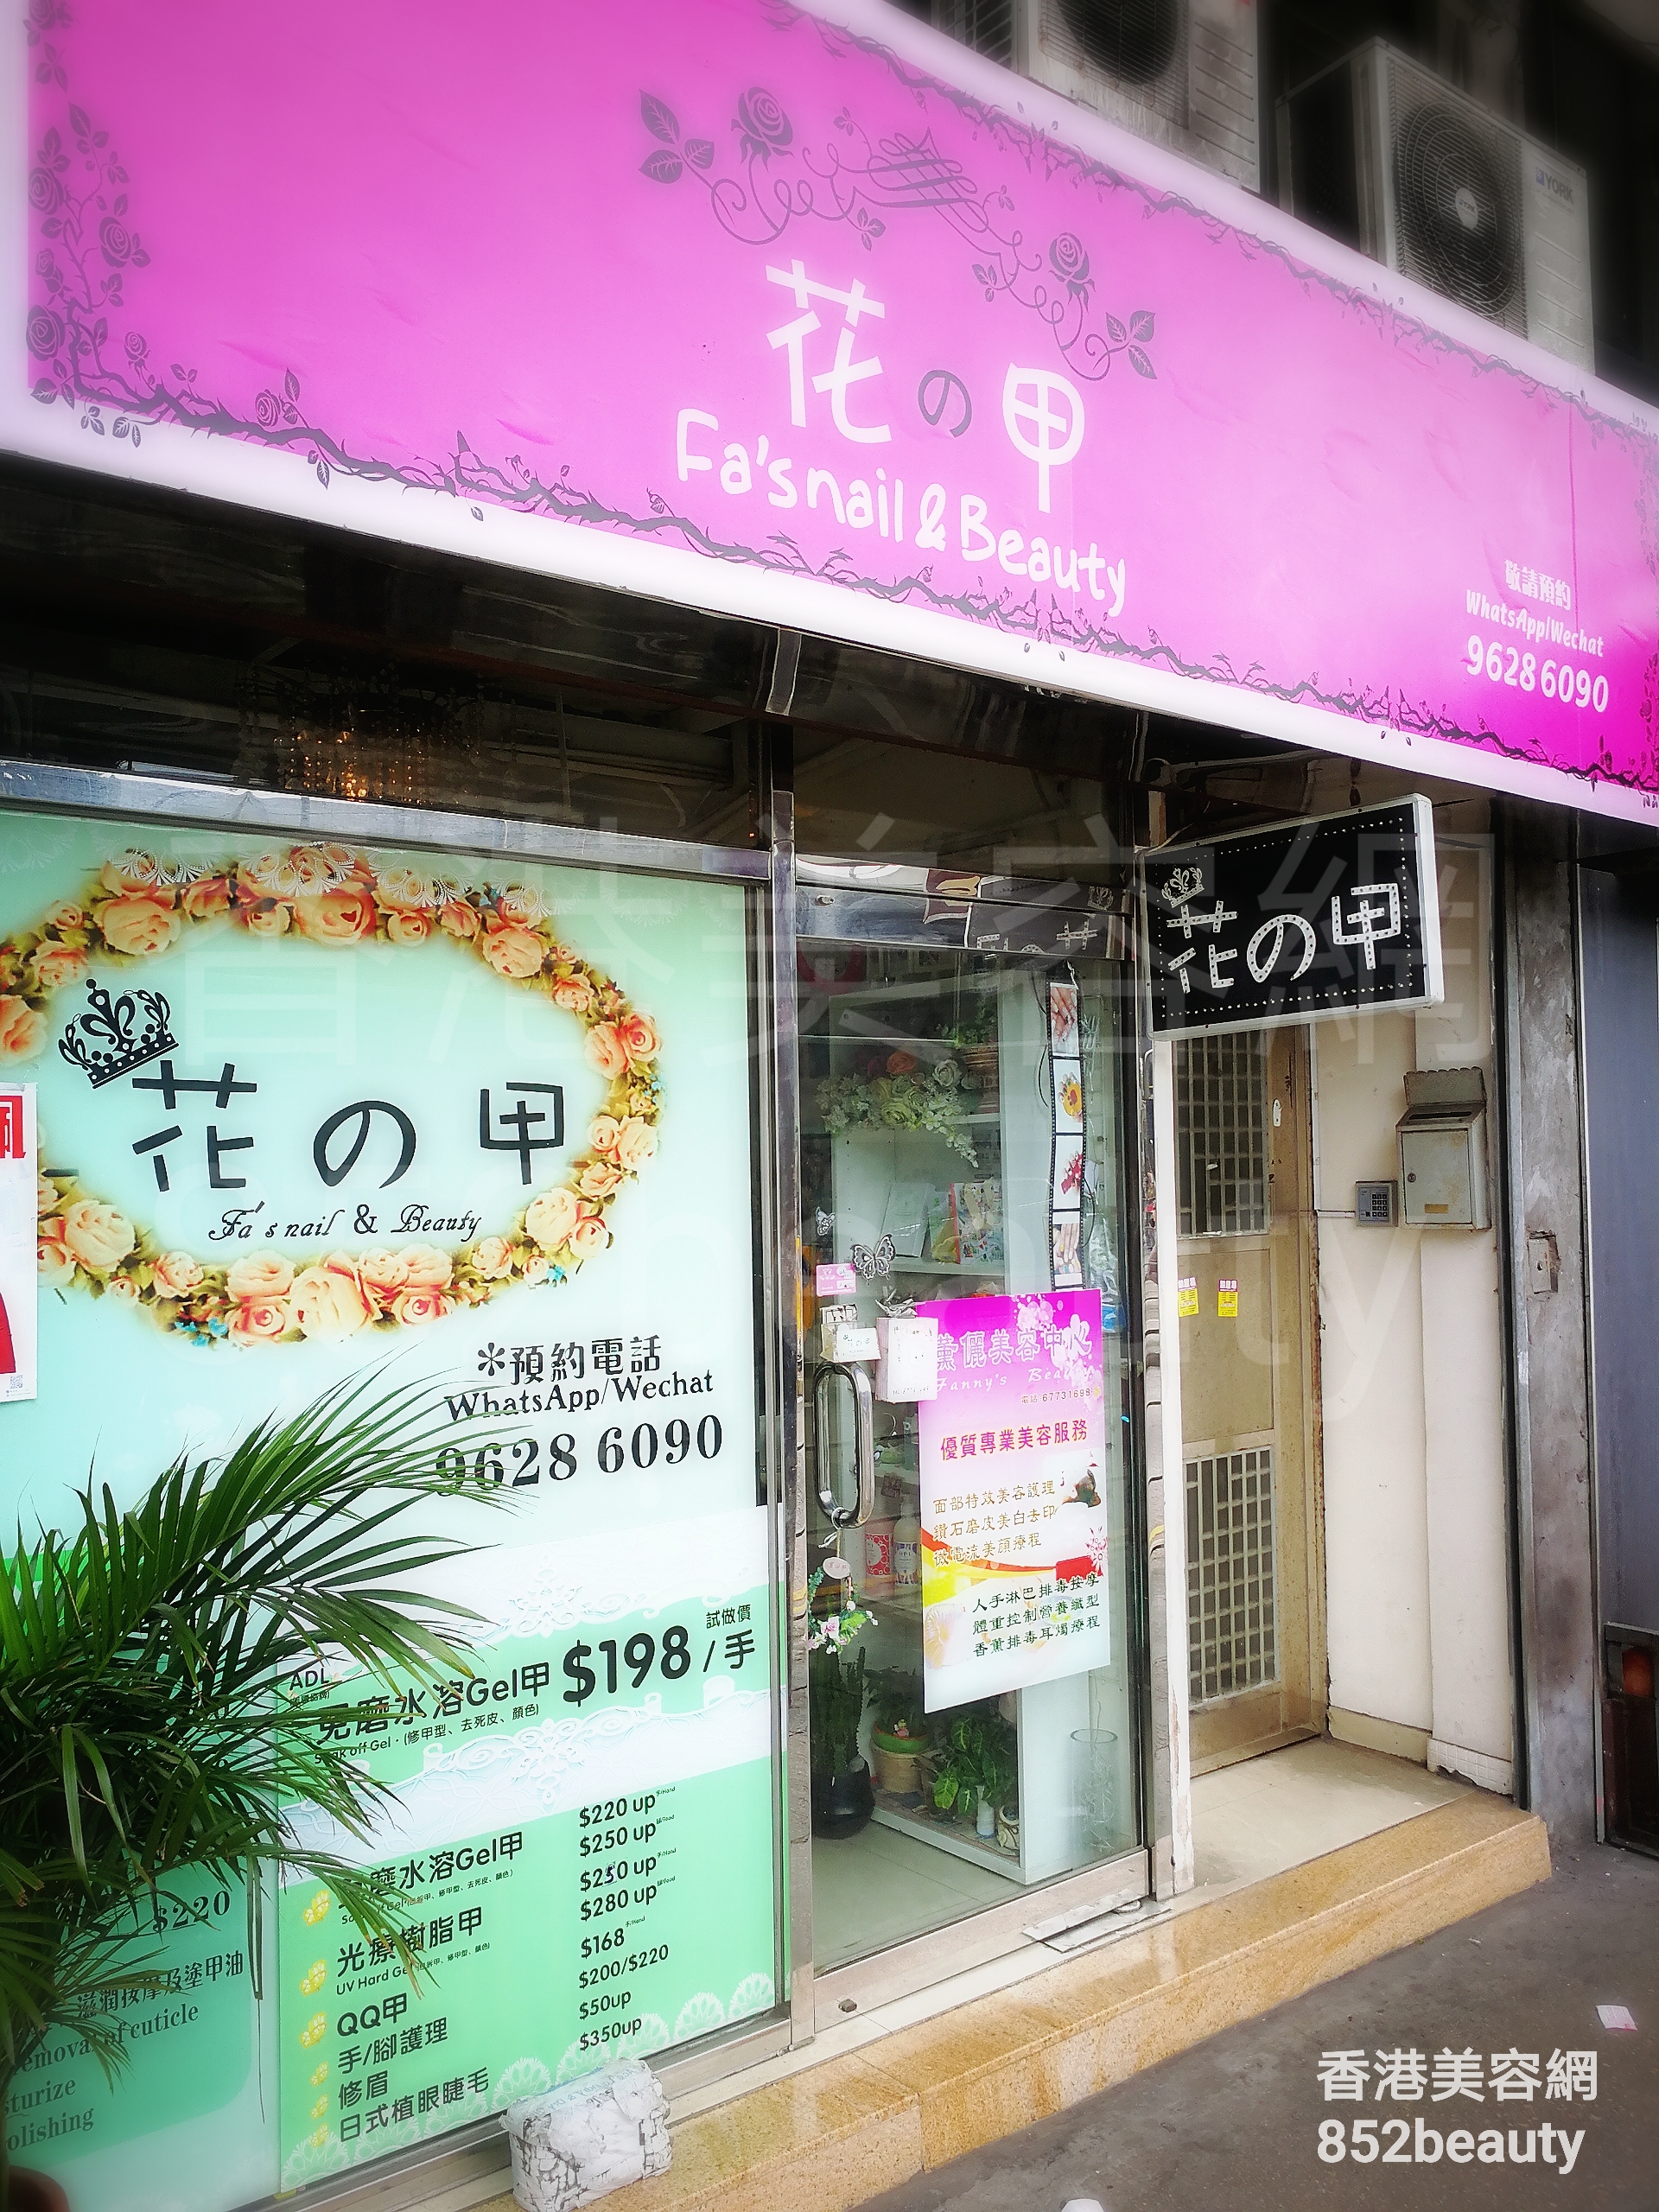 Hand and foot care: 花の甲